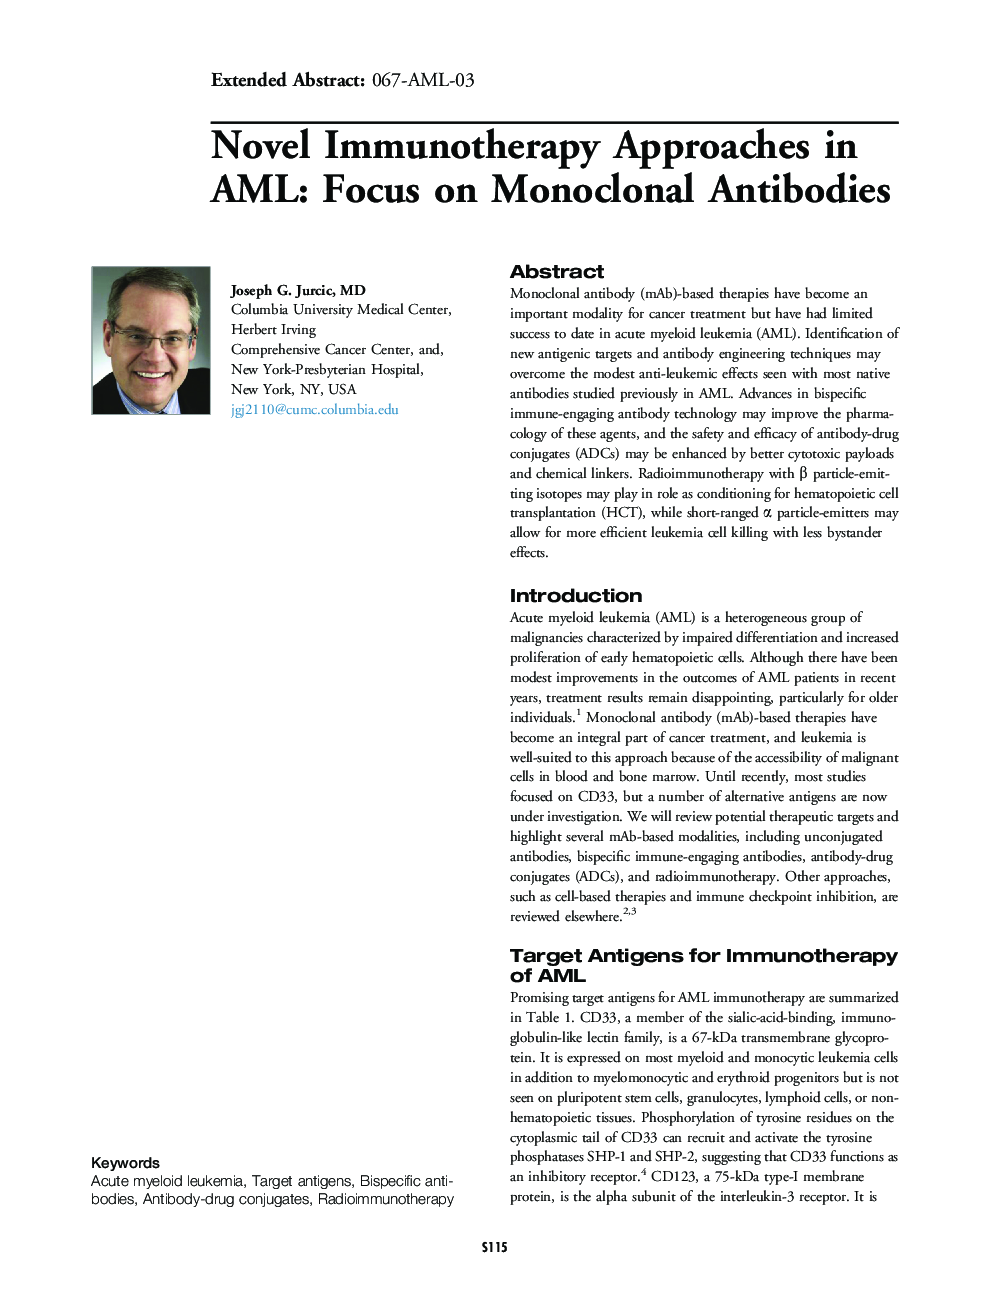 Novel Immunotherapy Approaches in AML: Focus on Monoclonal Antibodies